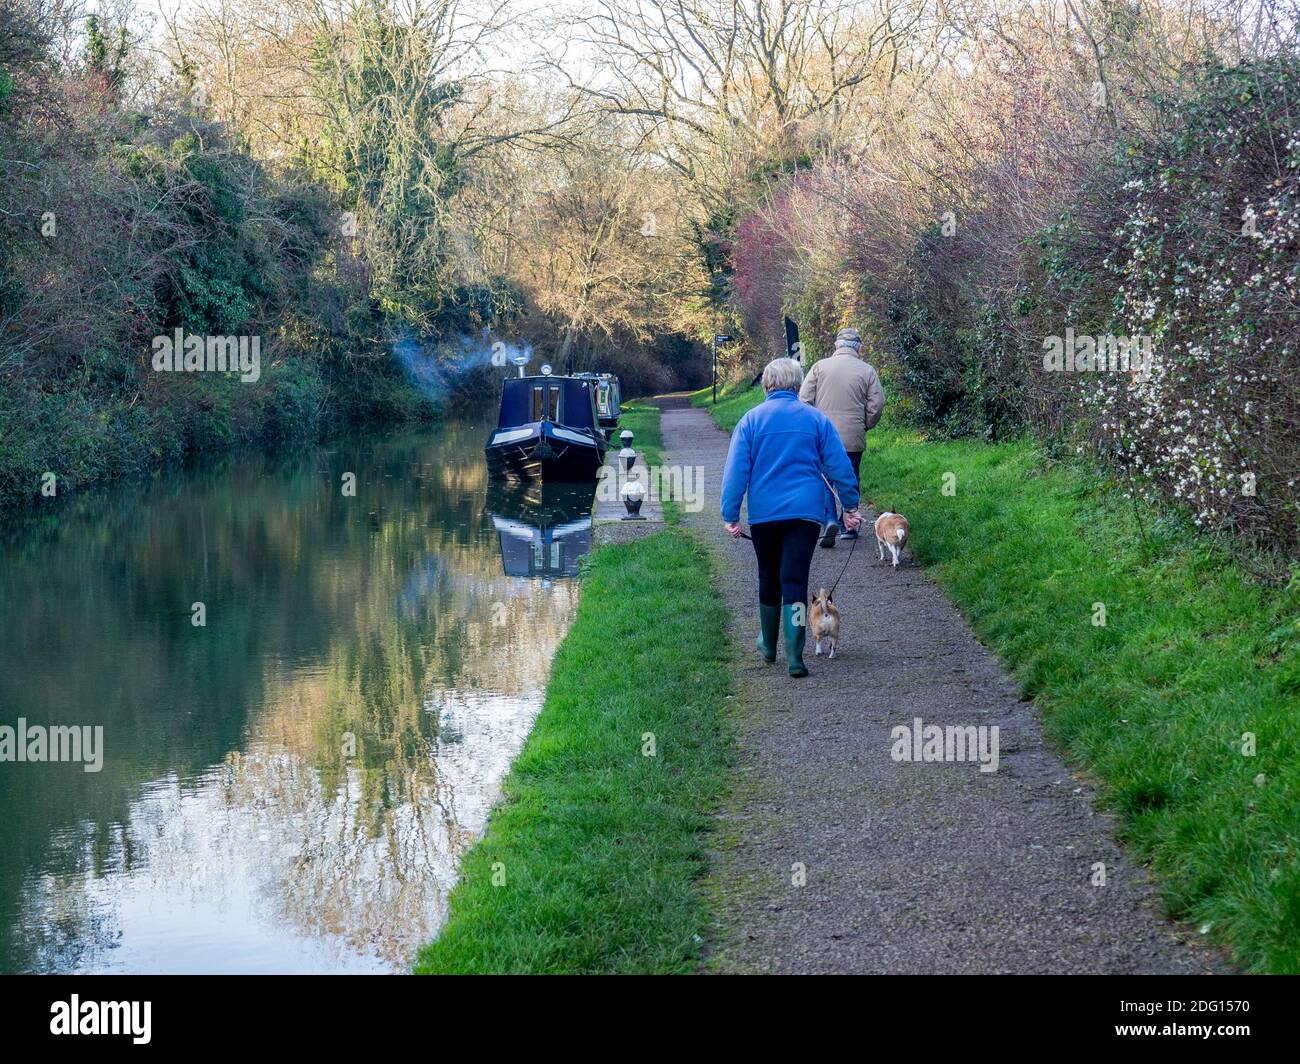 Winter scene on the Grand Union canal, Stoke Bruerne, Northamptonshire, UK; two dog walkers passing a narrowboat with smoking chimney Stock Photo